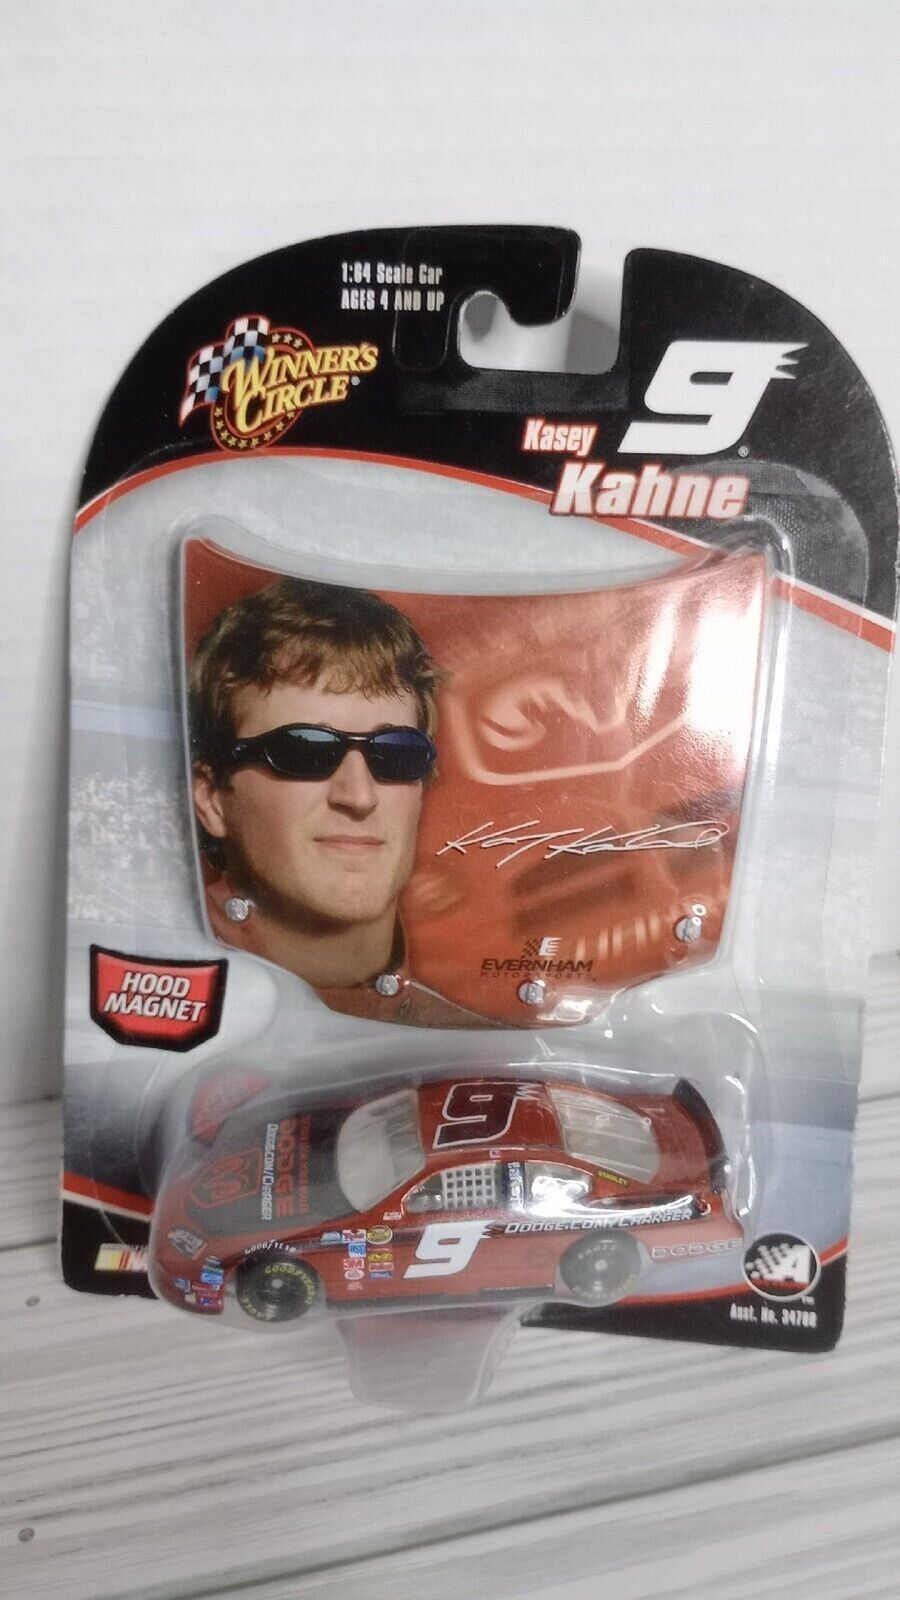 2005 Kasey Kahne #9 Dodge.com/Charger Winners Circle 1/64 Diecast New - $12.86